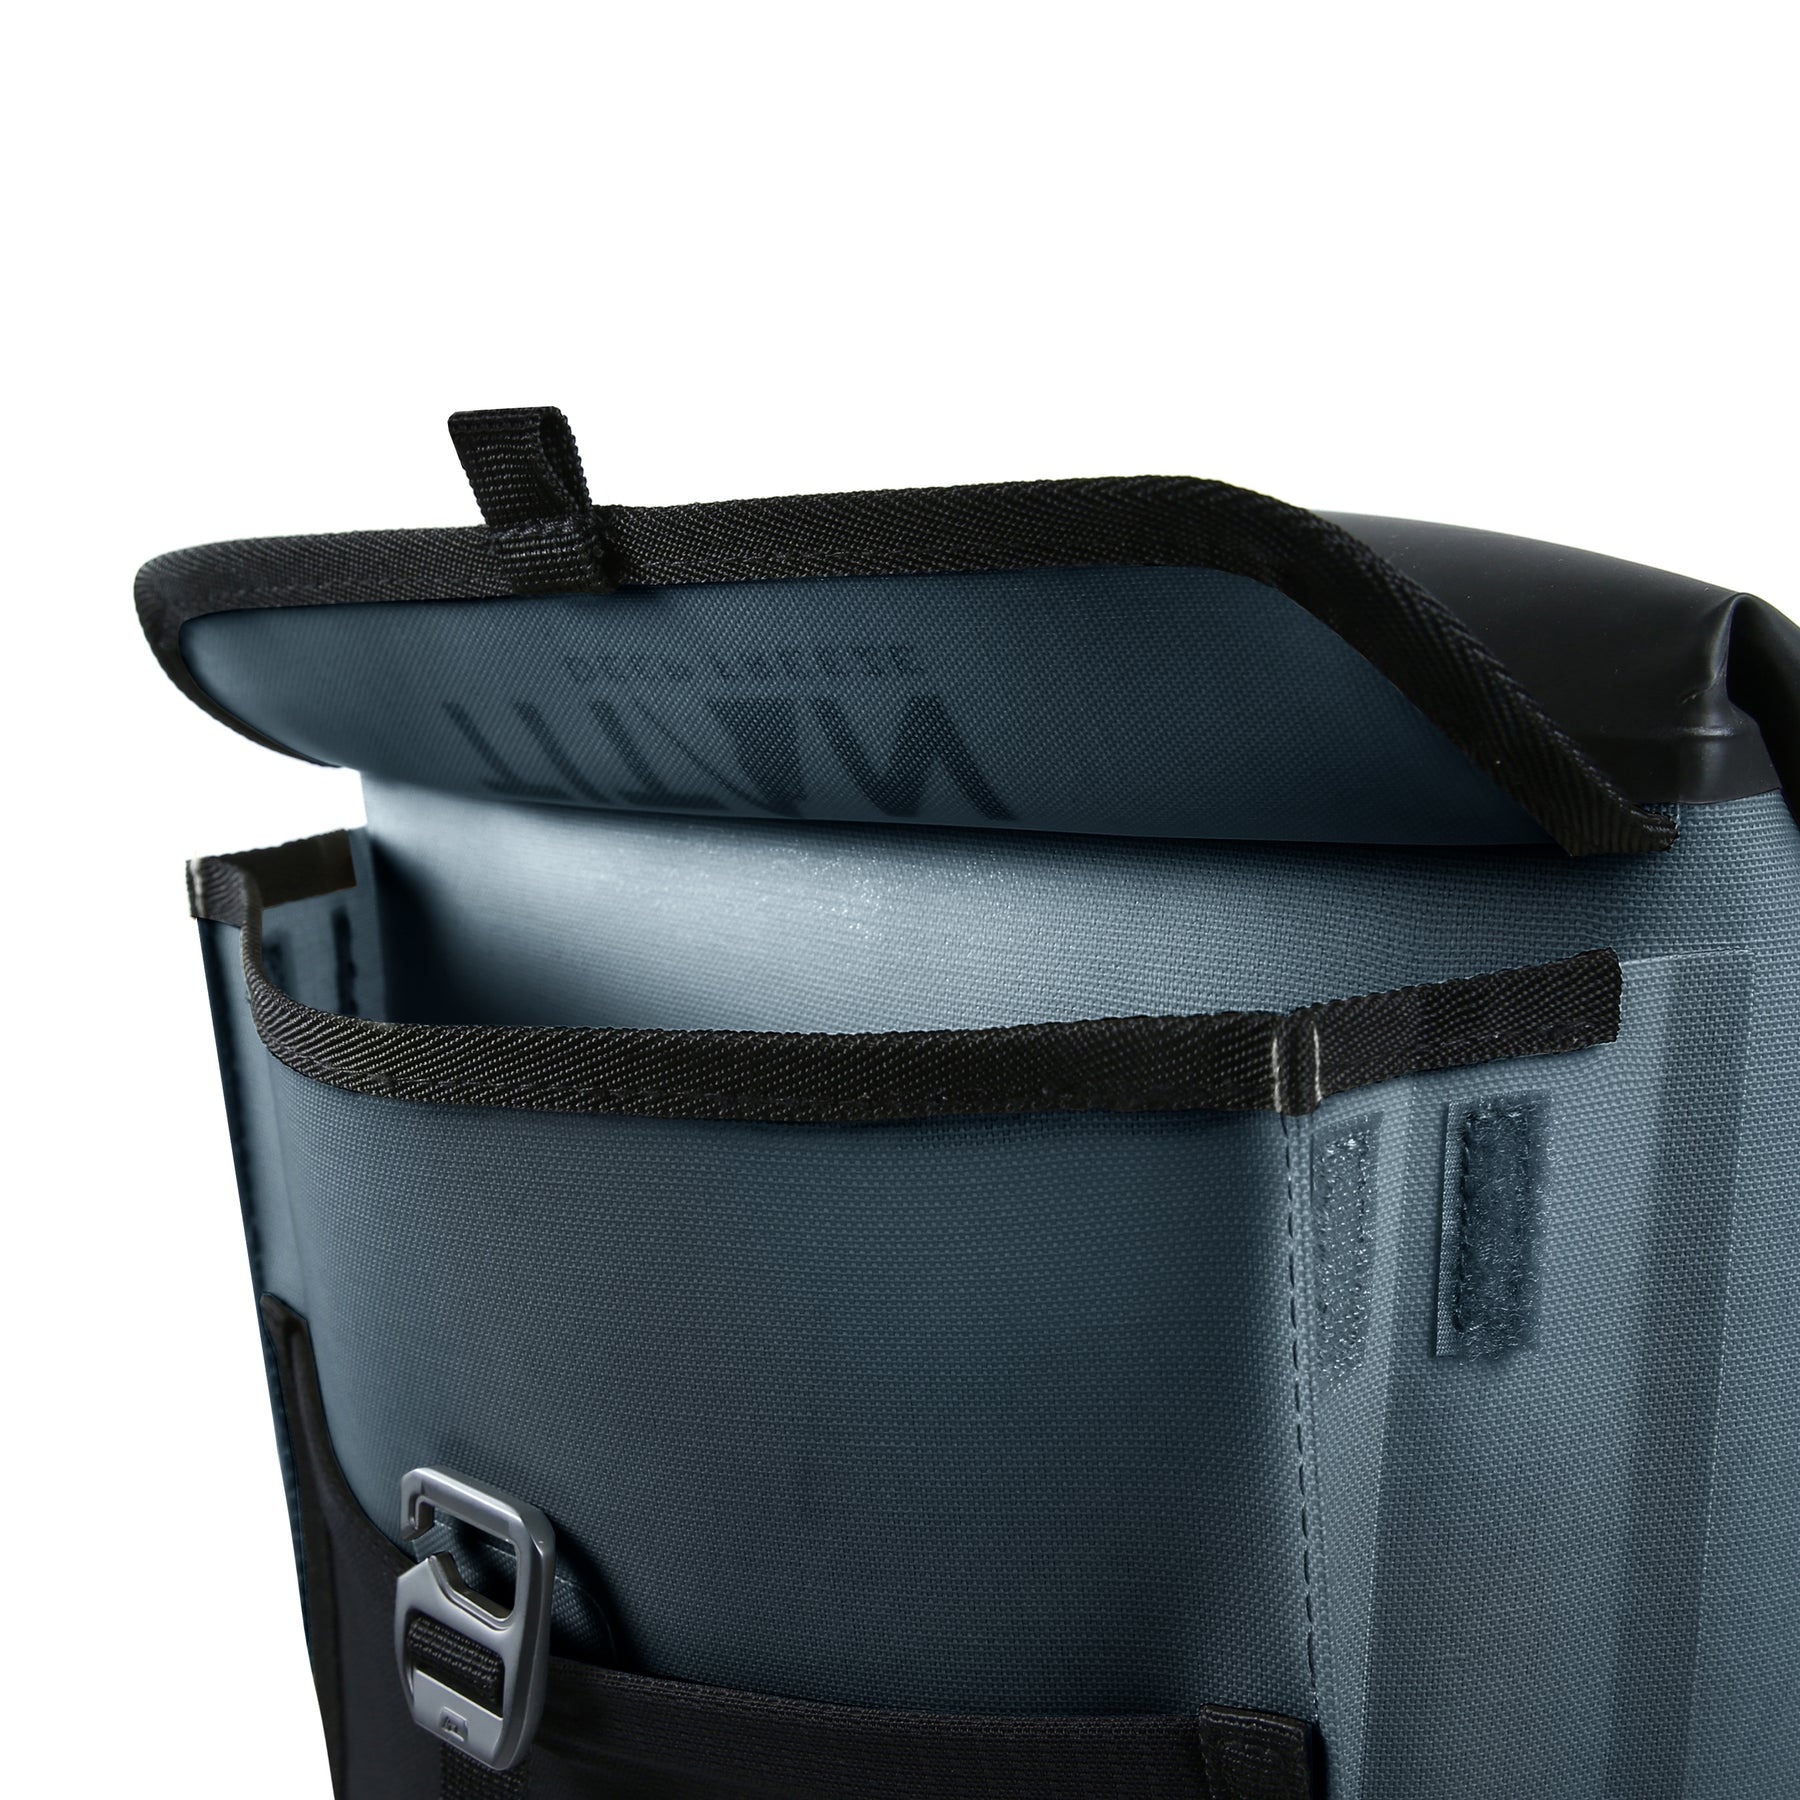 24 Can Welded Backpack Cooler